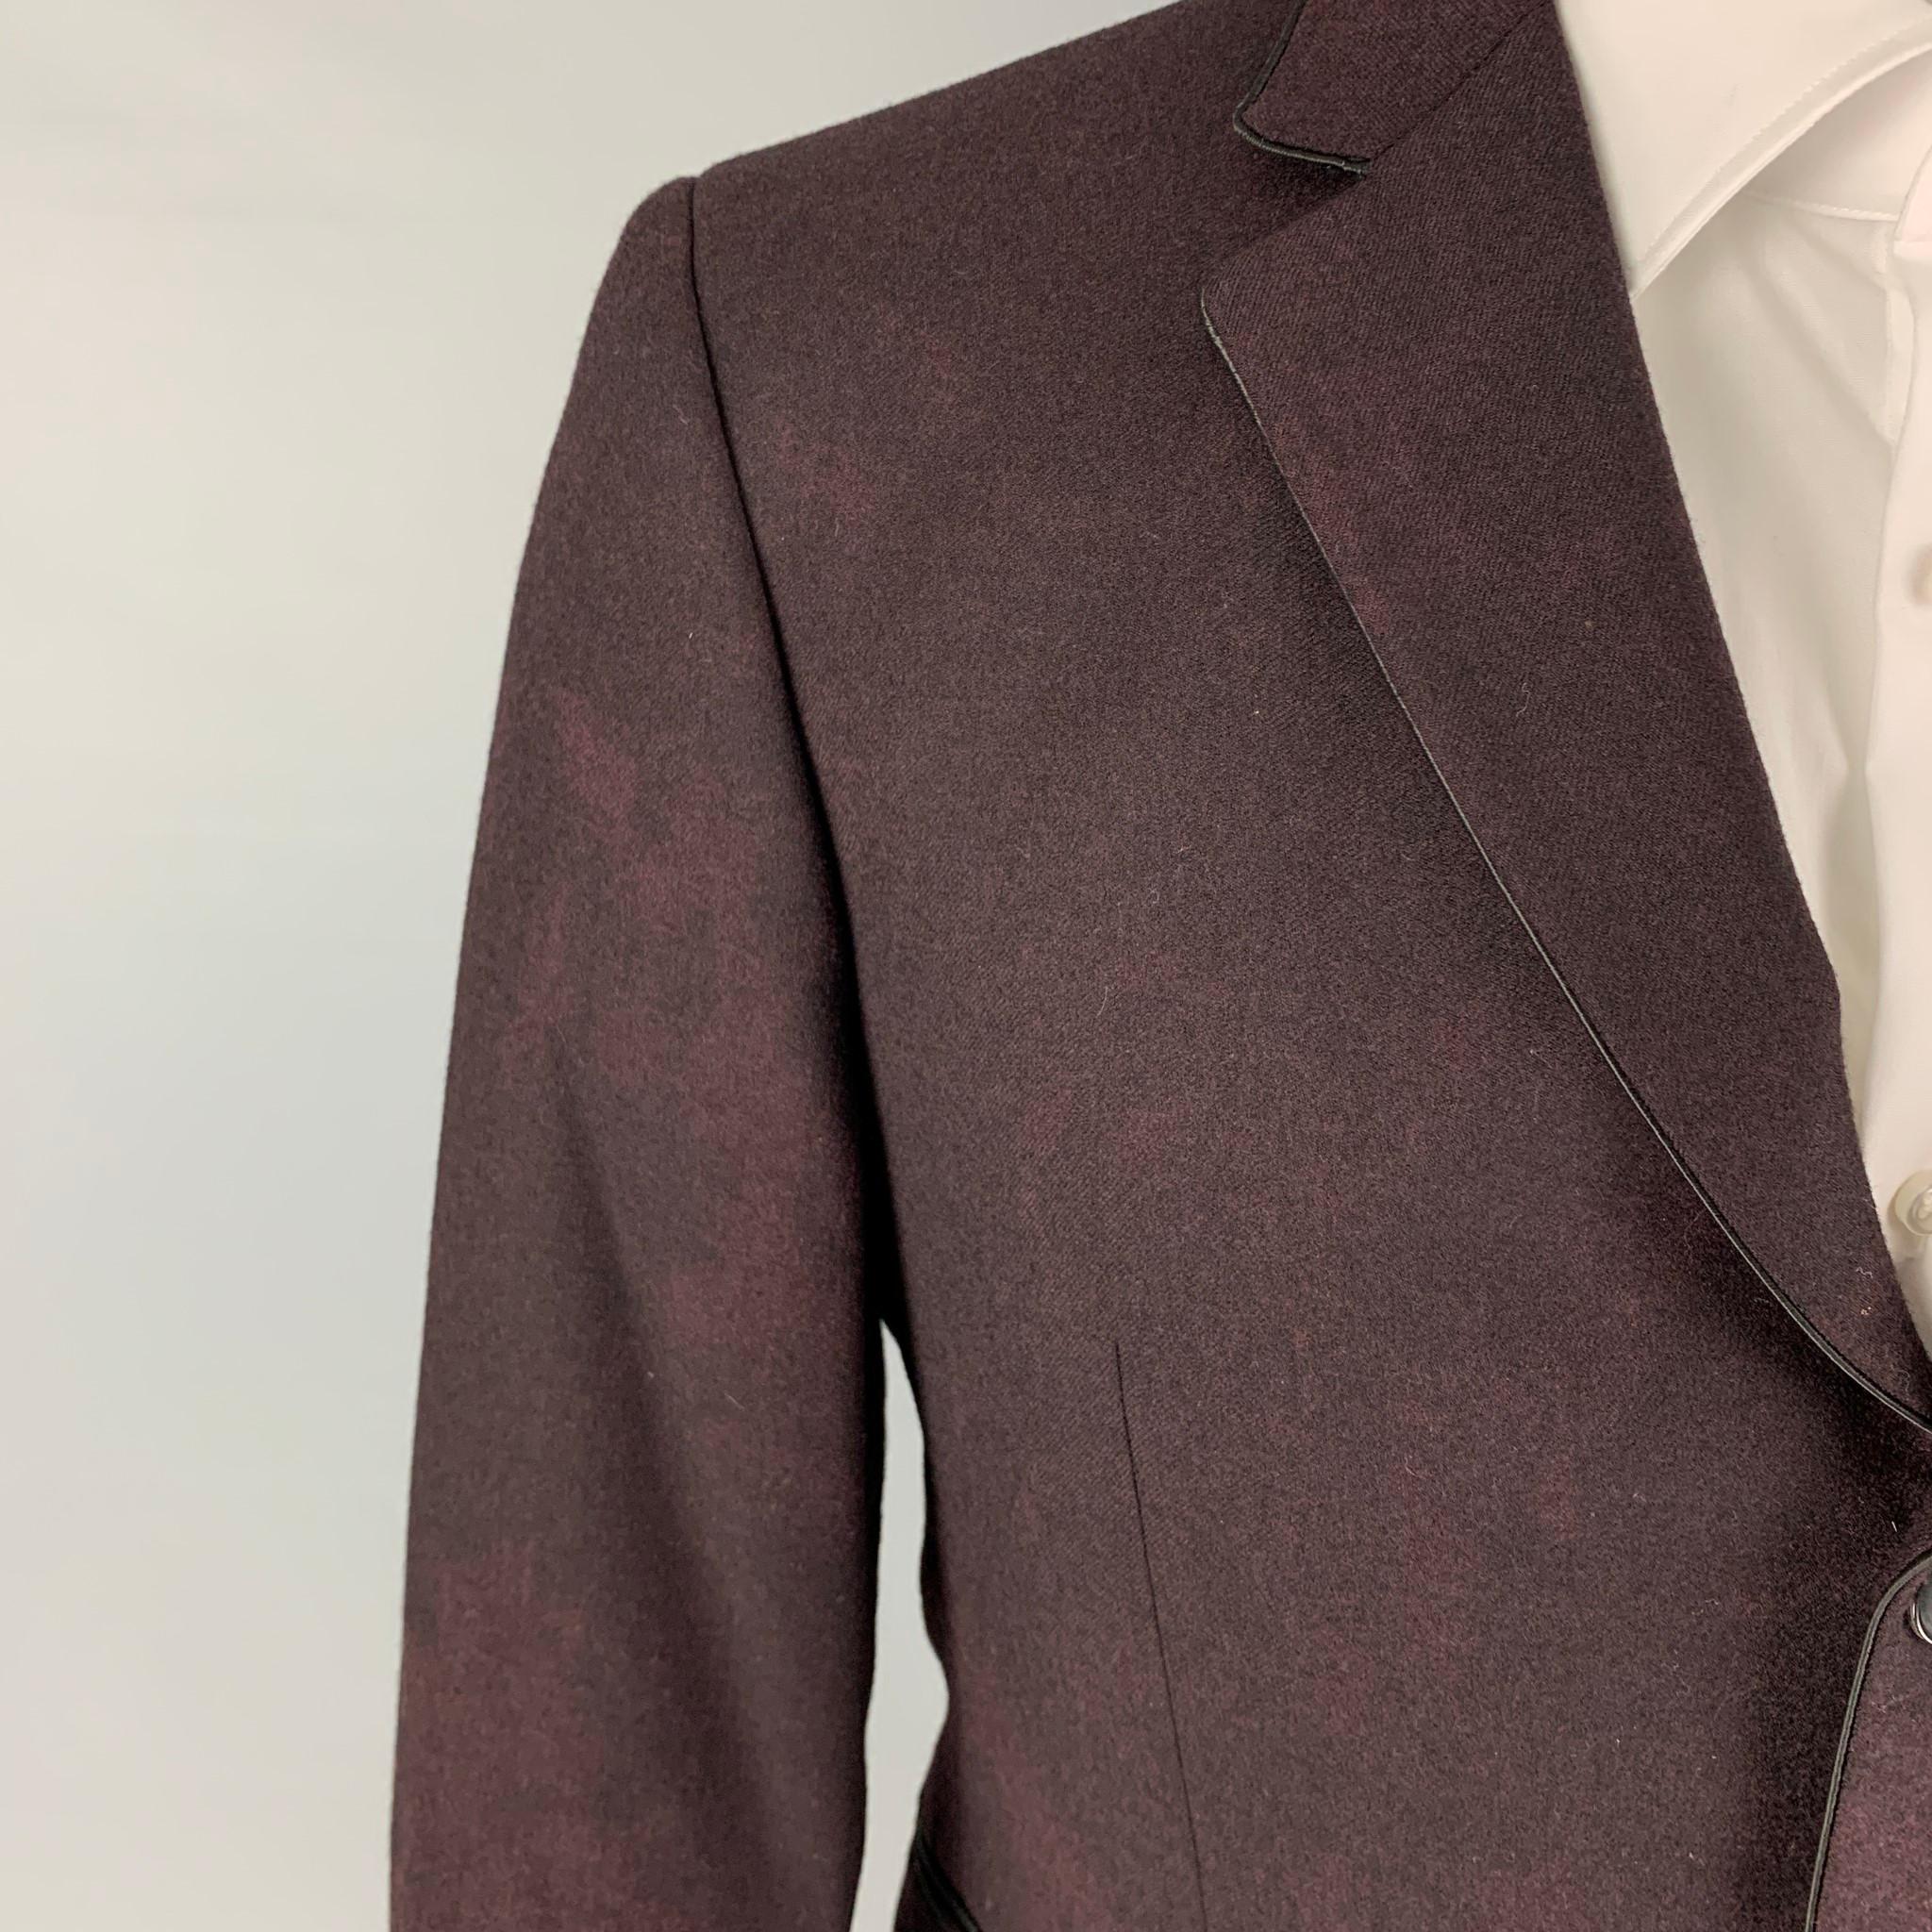 JOHN VARVATOS sport coat comes in a burgundy / black dyed wool with a full liner featuring a notch lapel, slit pockets, double back vent, and a three button closure. Made in Italy. 

Very Good Pre-Owned Condition.
Marked: